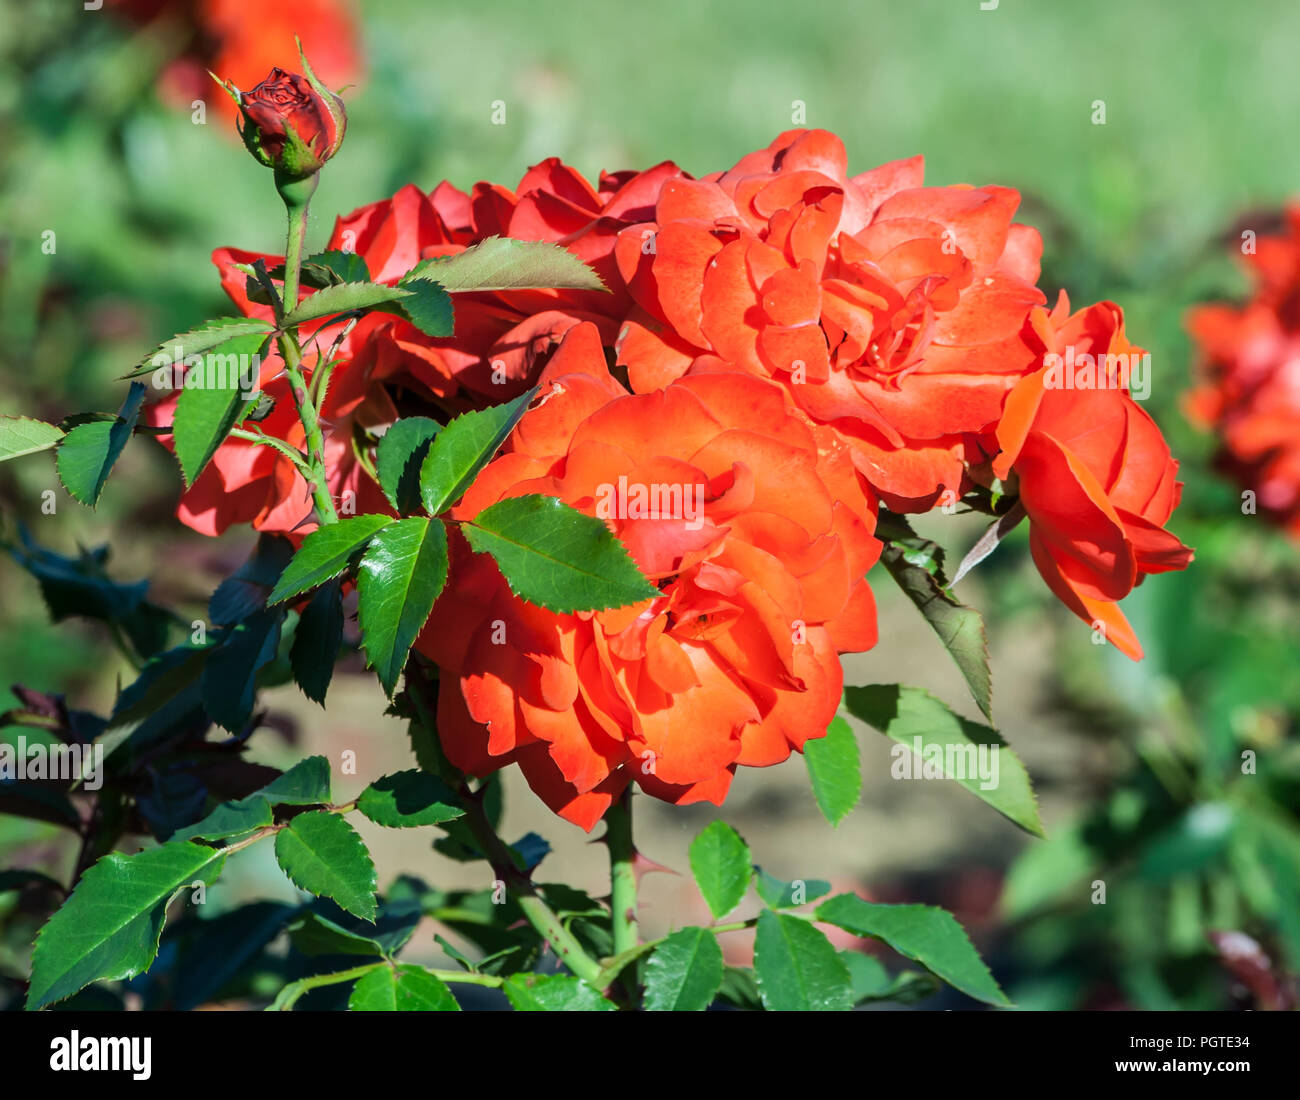 Pink Sunlit Rose High Resolution Stock Photography and Images - Alamy